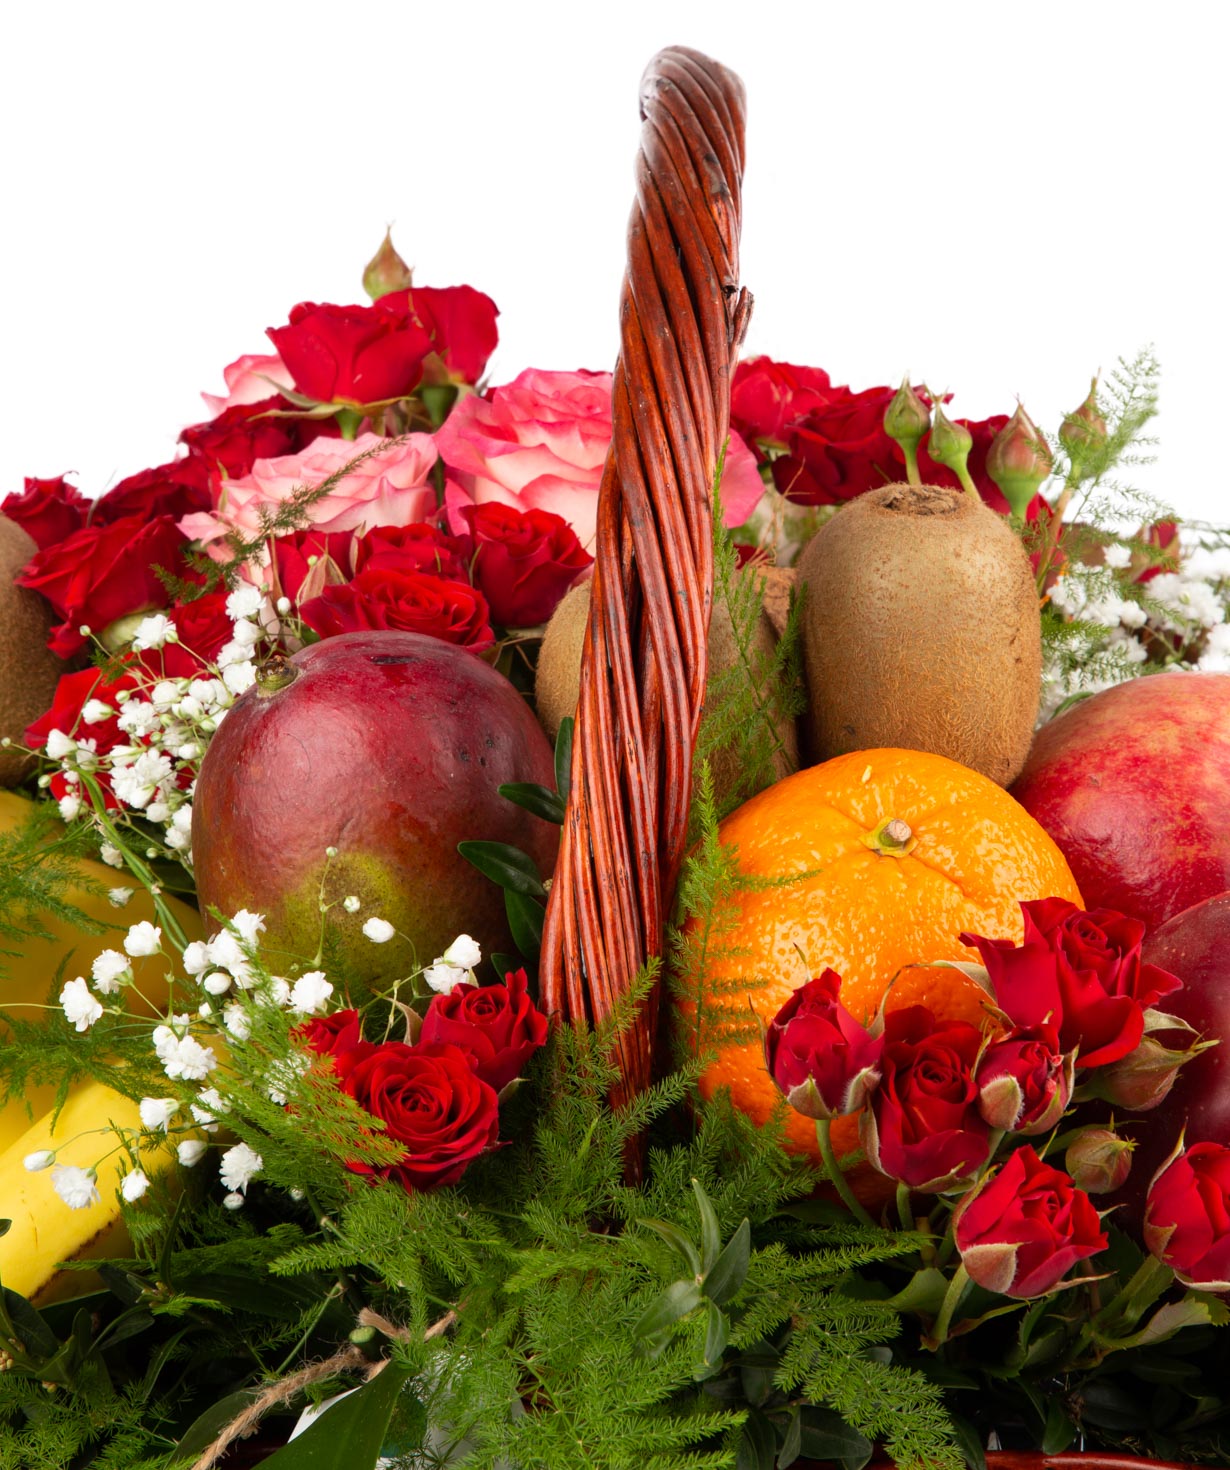 Composition `Brabos` with flowers and fruits